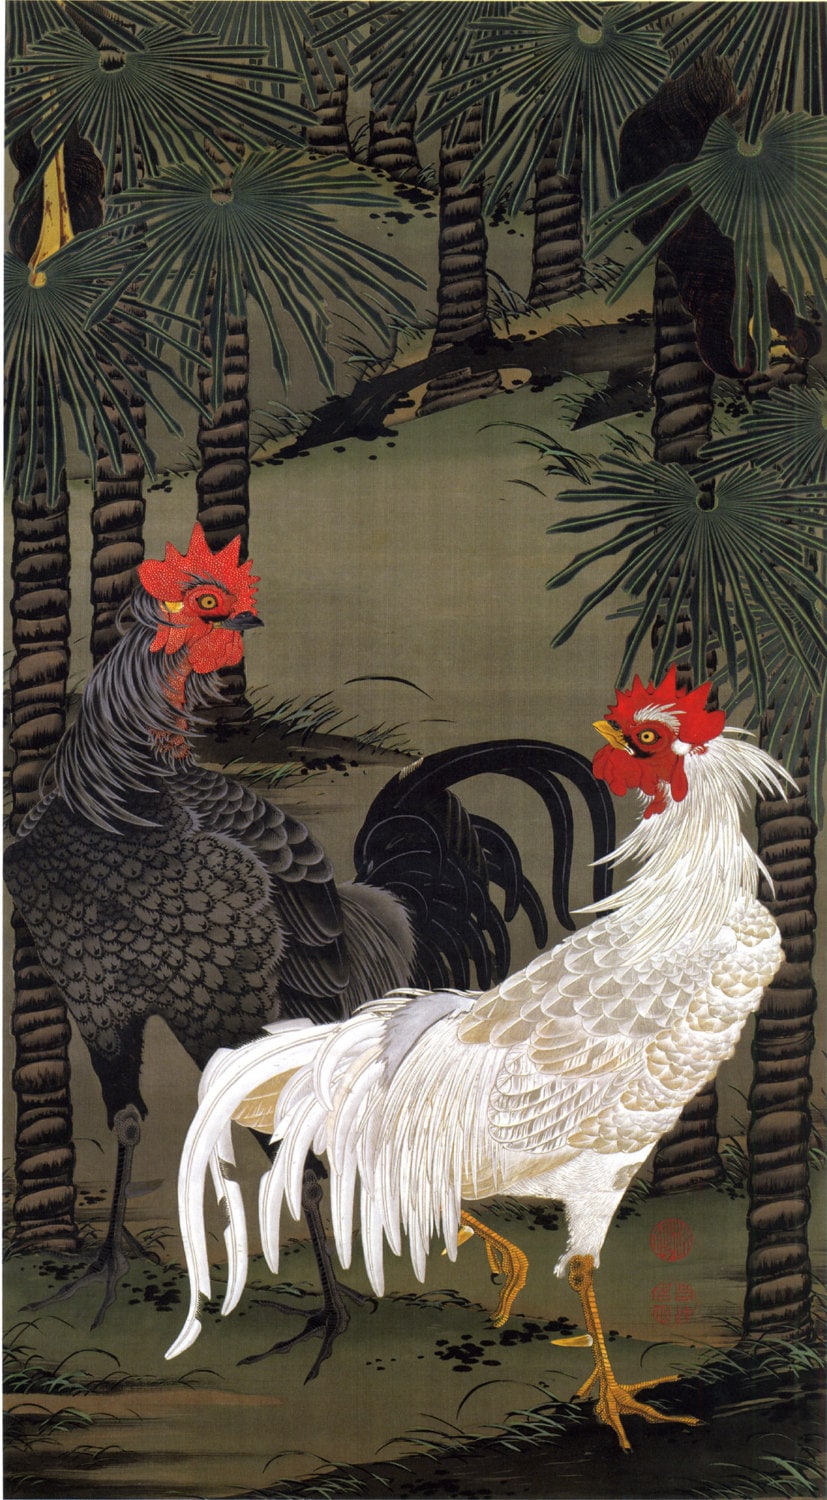 Japanese Art. Fine Art Reproduction. Palm Tree and Roosters | Etsy